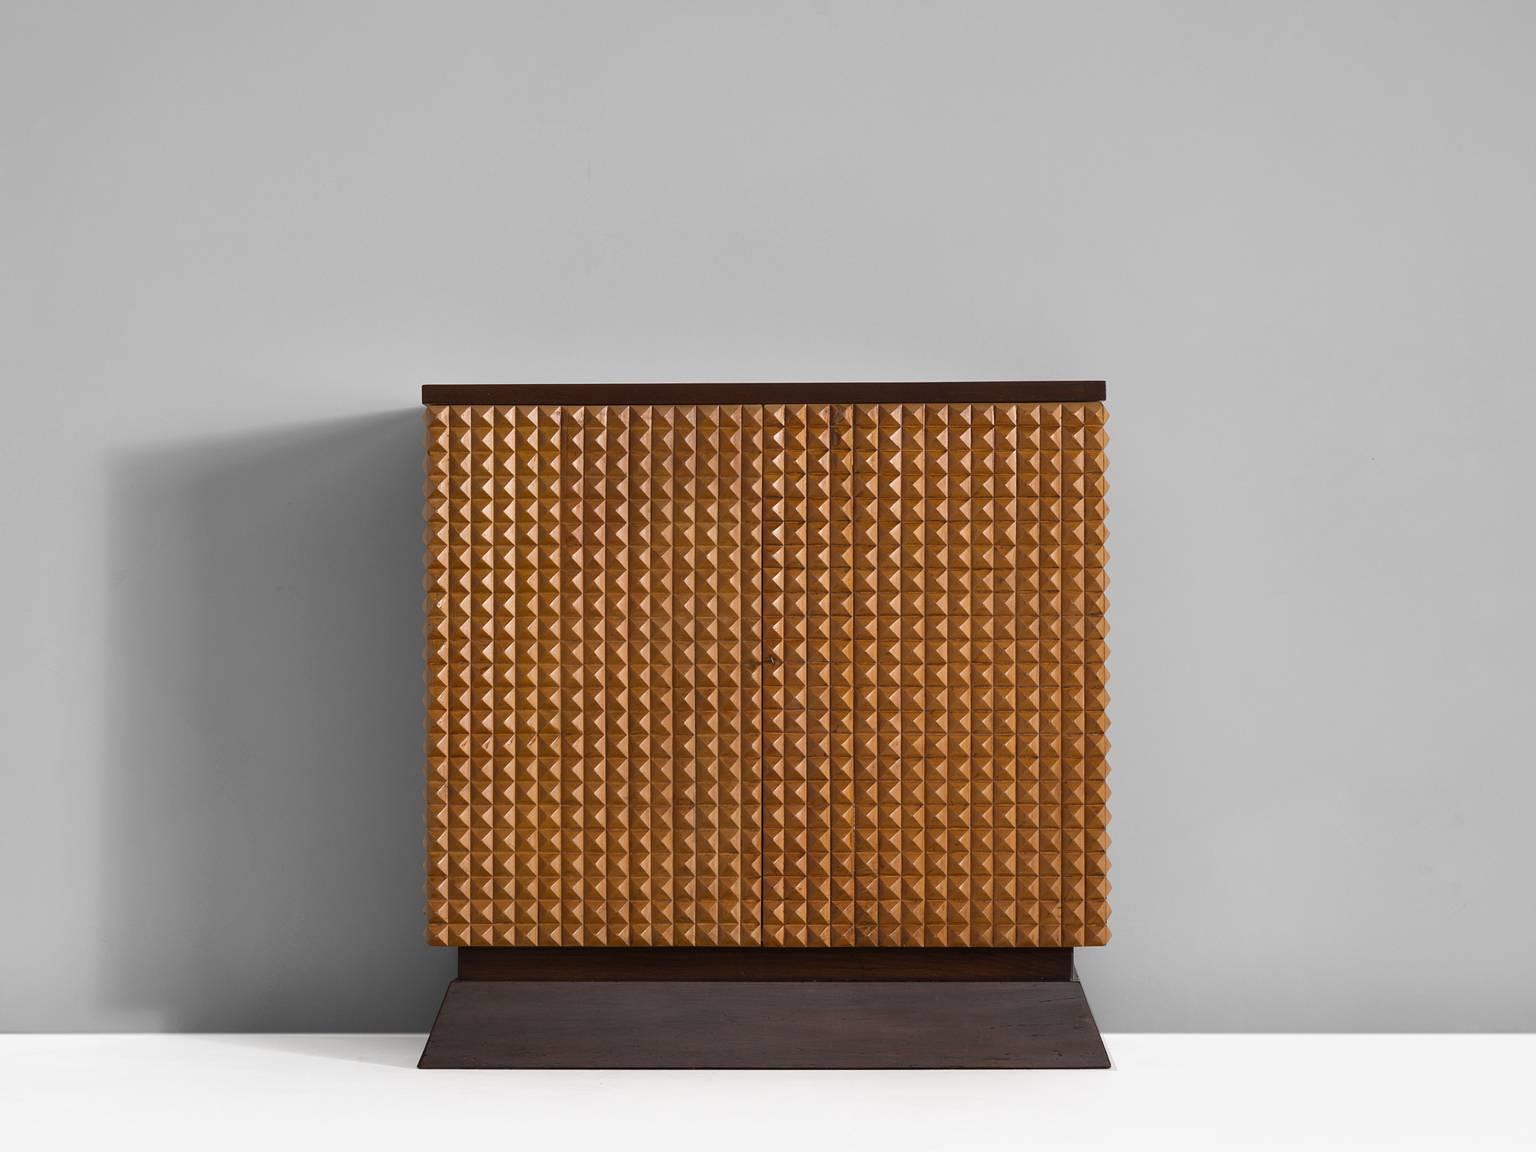 Credenza with graphical, crafted three dimensional door panels in lacquered wood. The two doors, each feature a triangle/pyramid surface which is crafted to perfection. The continuous pattern gives this cabinet a strong expression, emphasized by its